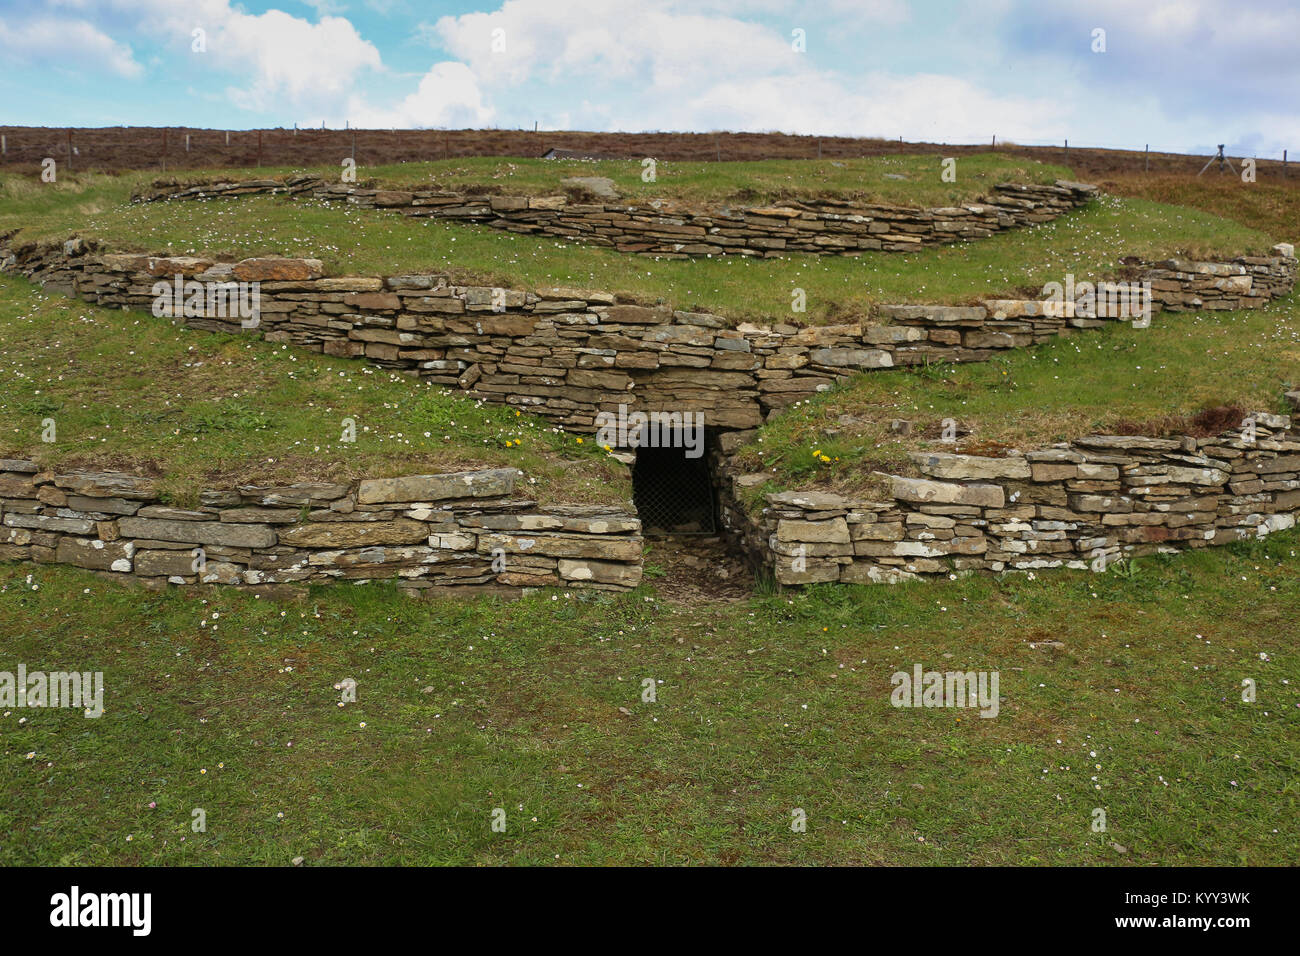 The Wideford Hill chambered cairn is reached after a 20 minute hike down a path. It has three terraces, central chamber and 3 side cells. Great views. Stock Photo